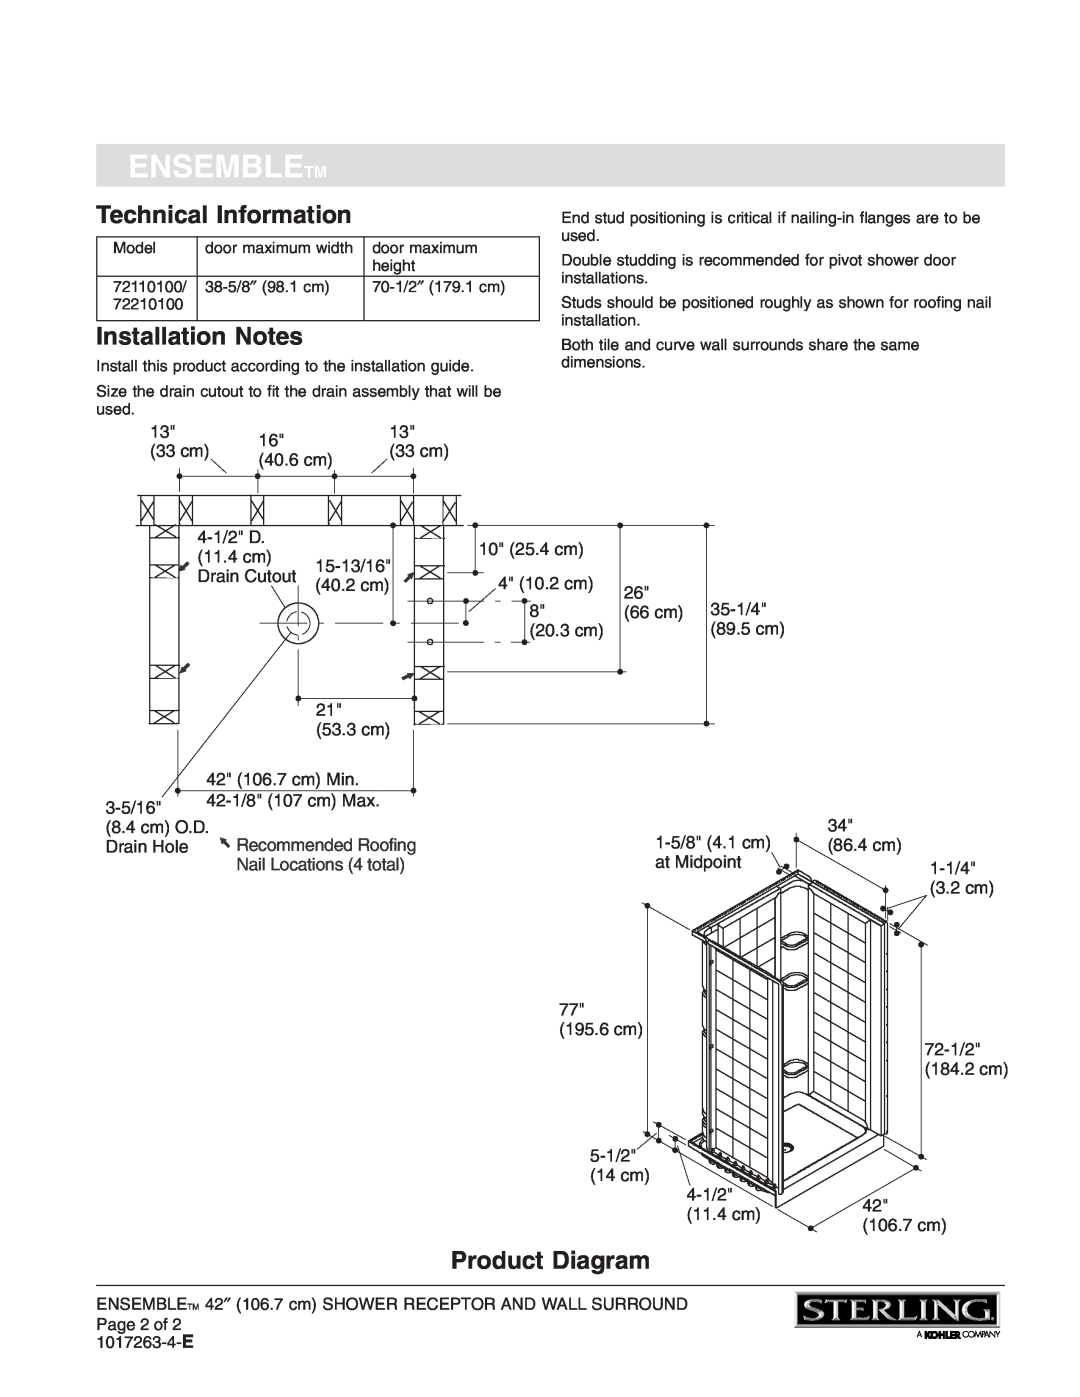 Sterling Plumbing 72110100 warranty Technical Information, Installation Notes, Product Diagram, Ensembletm 